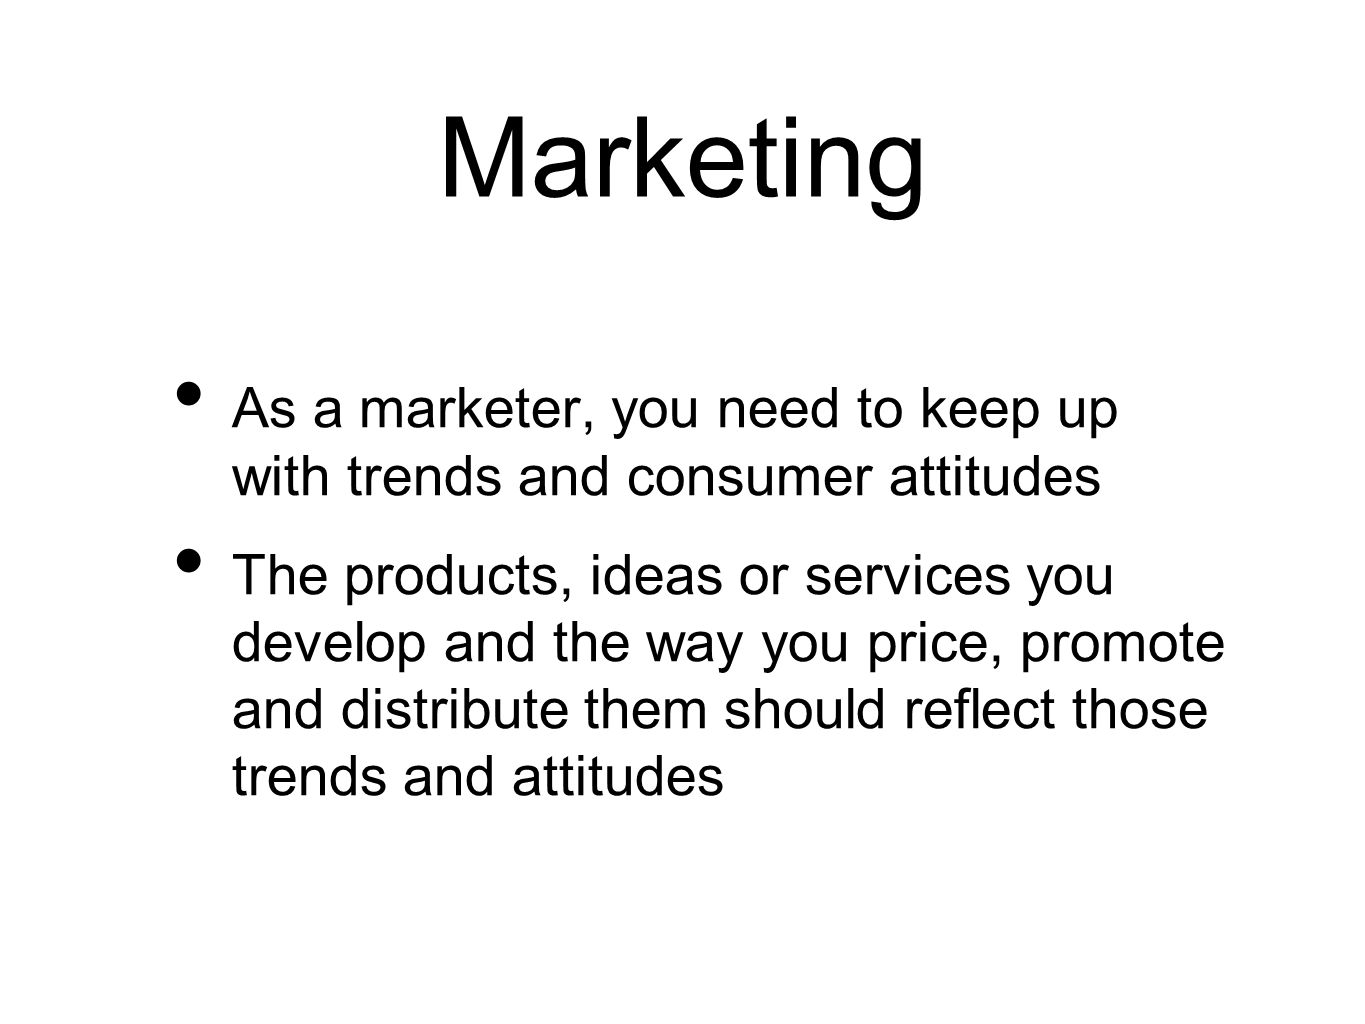 Marketing As a marketer, you need to keep up with trends and consumer attitudes The products, ideas or services you develop and the way you price, promote and distribute them should reflect those trends and attitudes